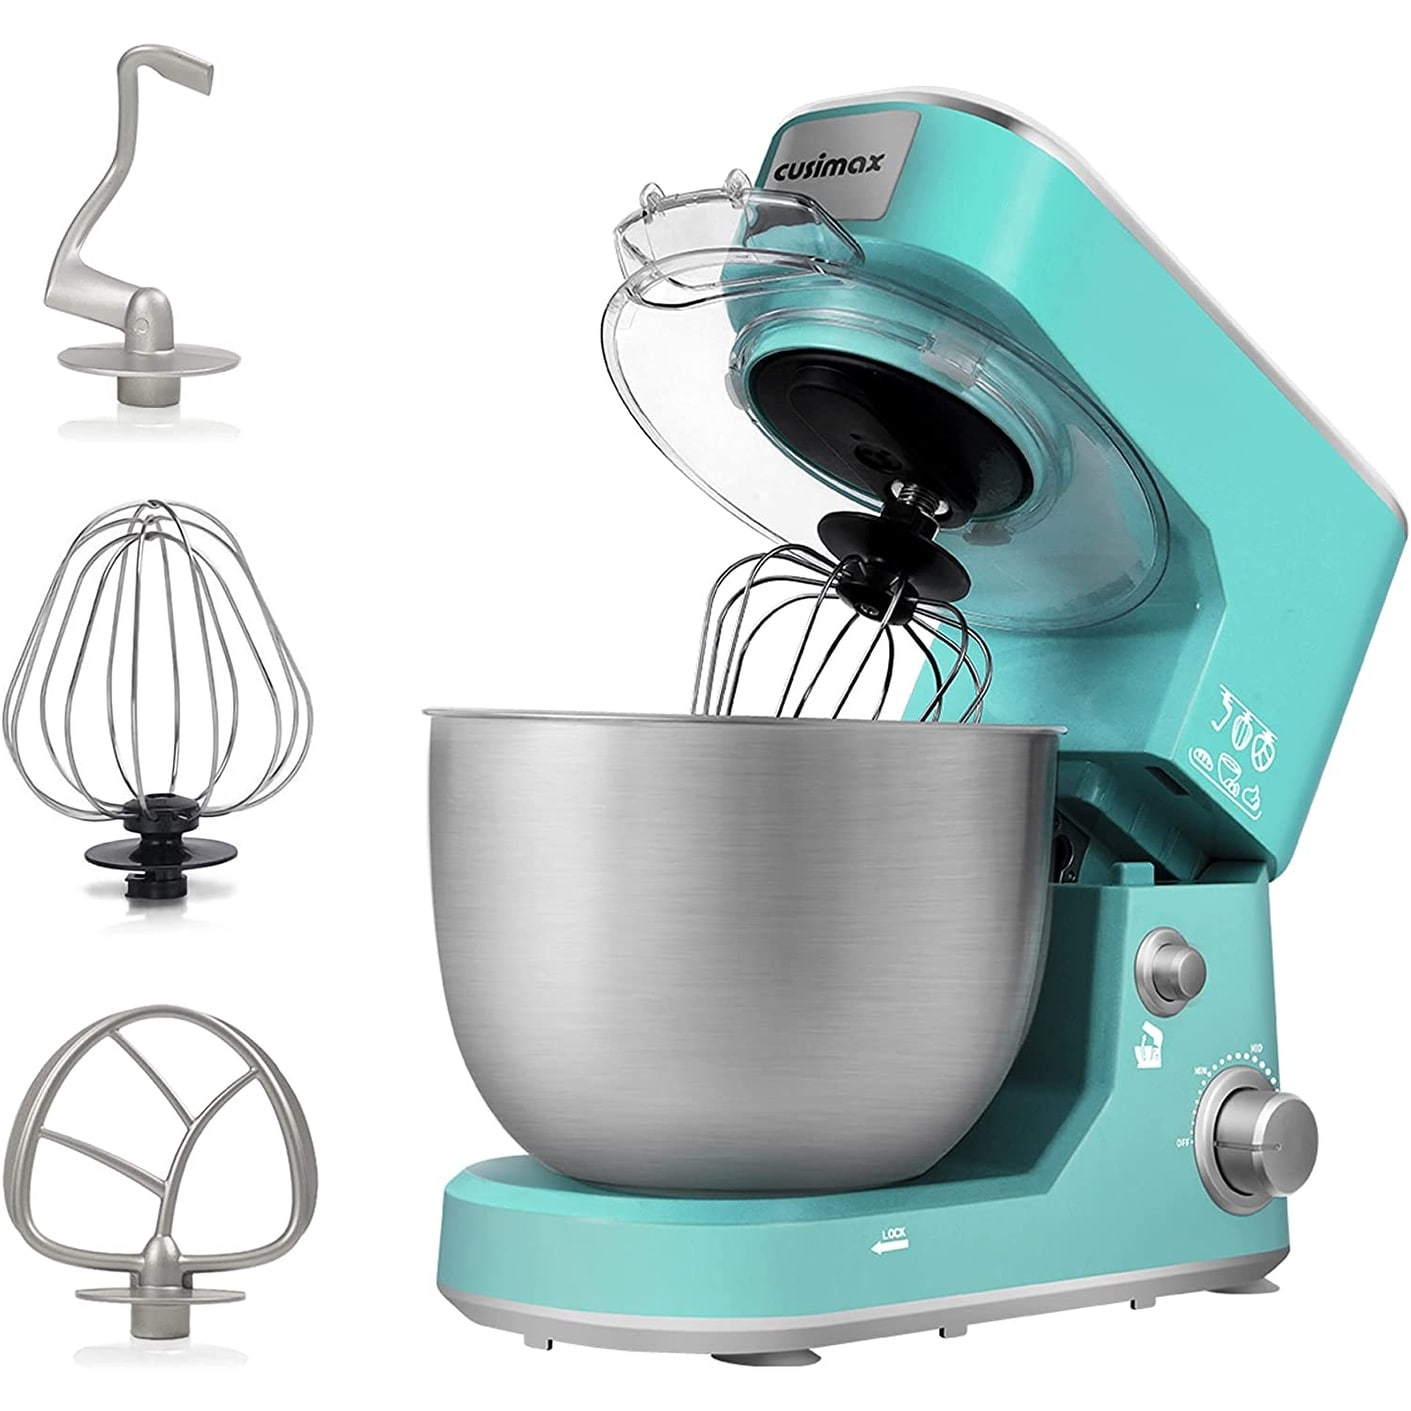 Deco Chef 5.5 QT Kitchen Stand Mixer, 550W 8-Speed Motor, includes